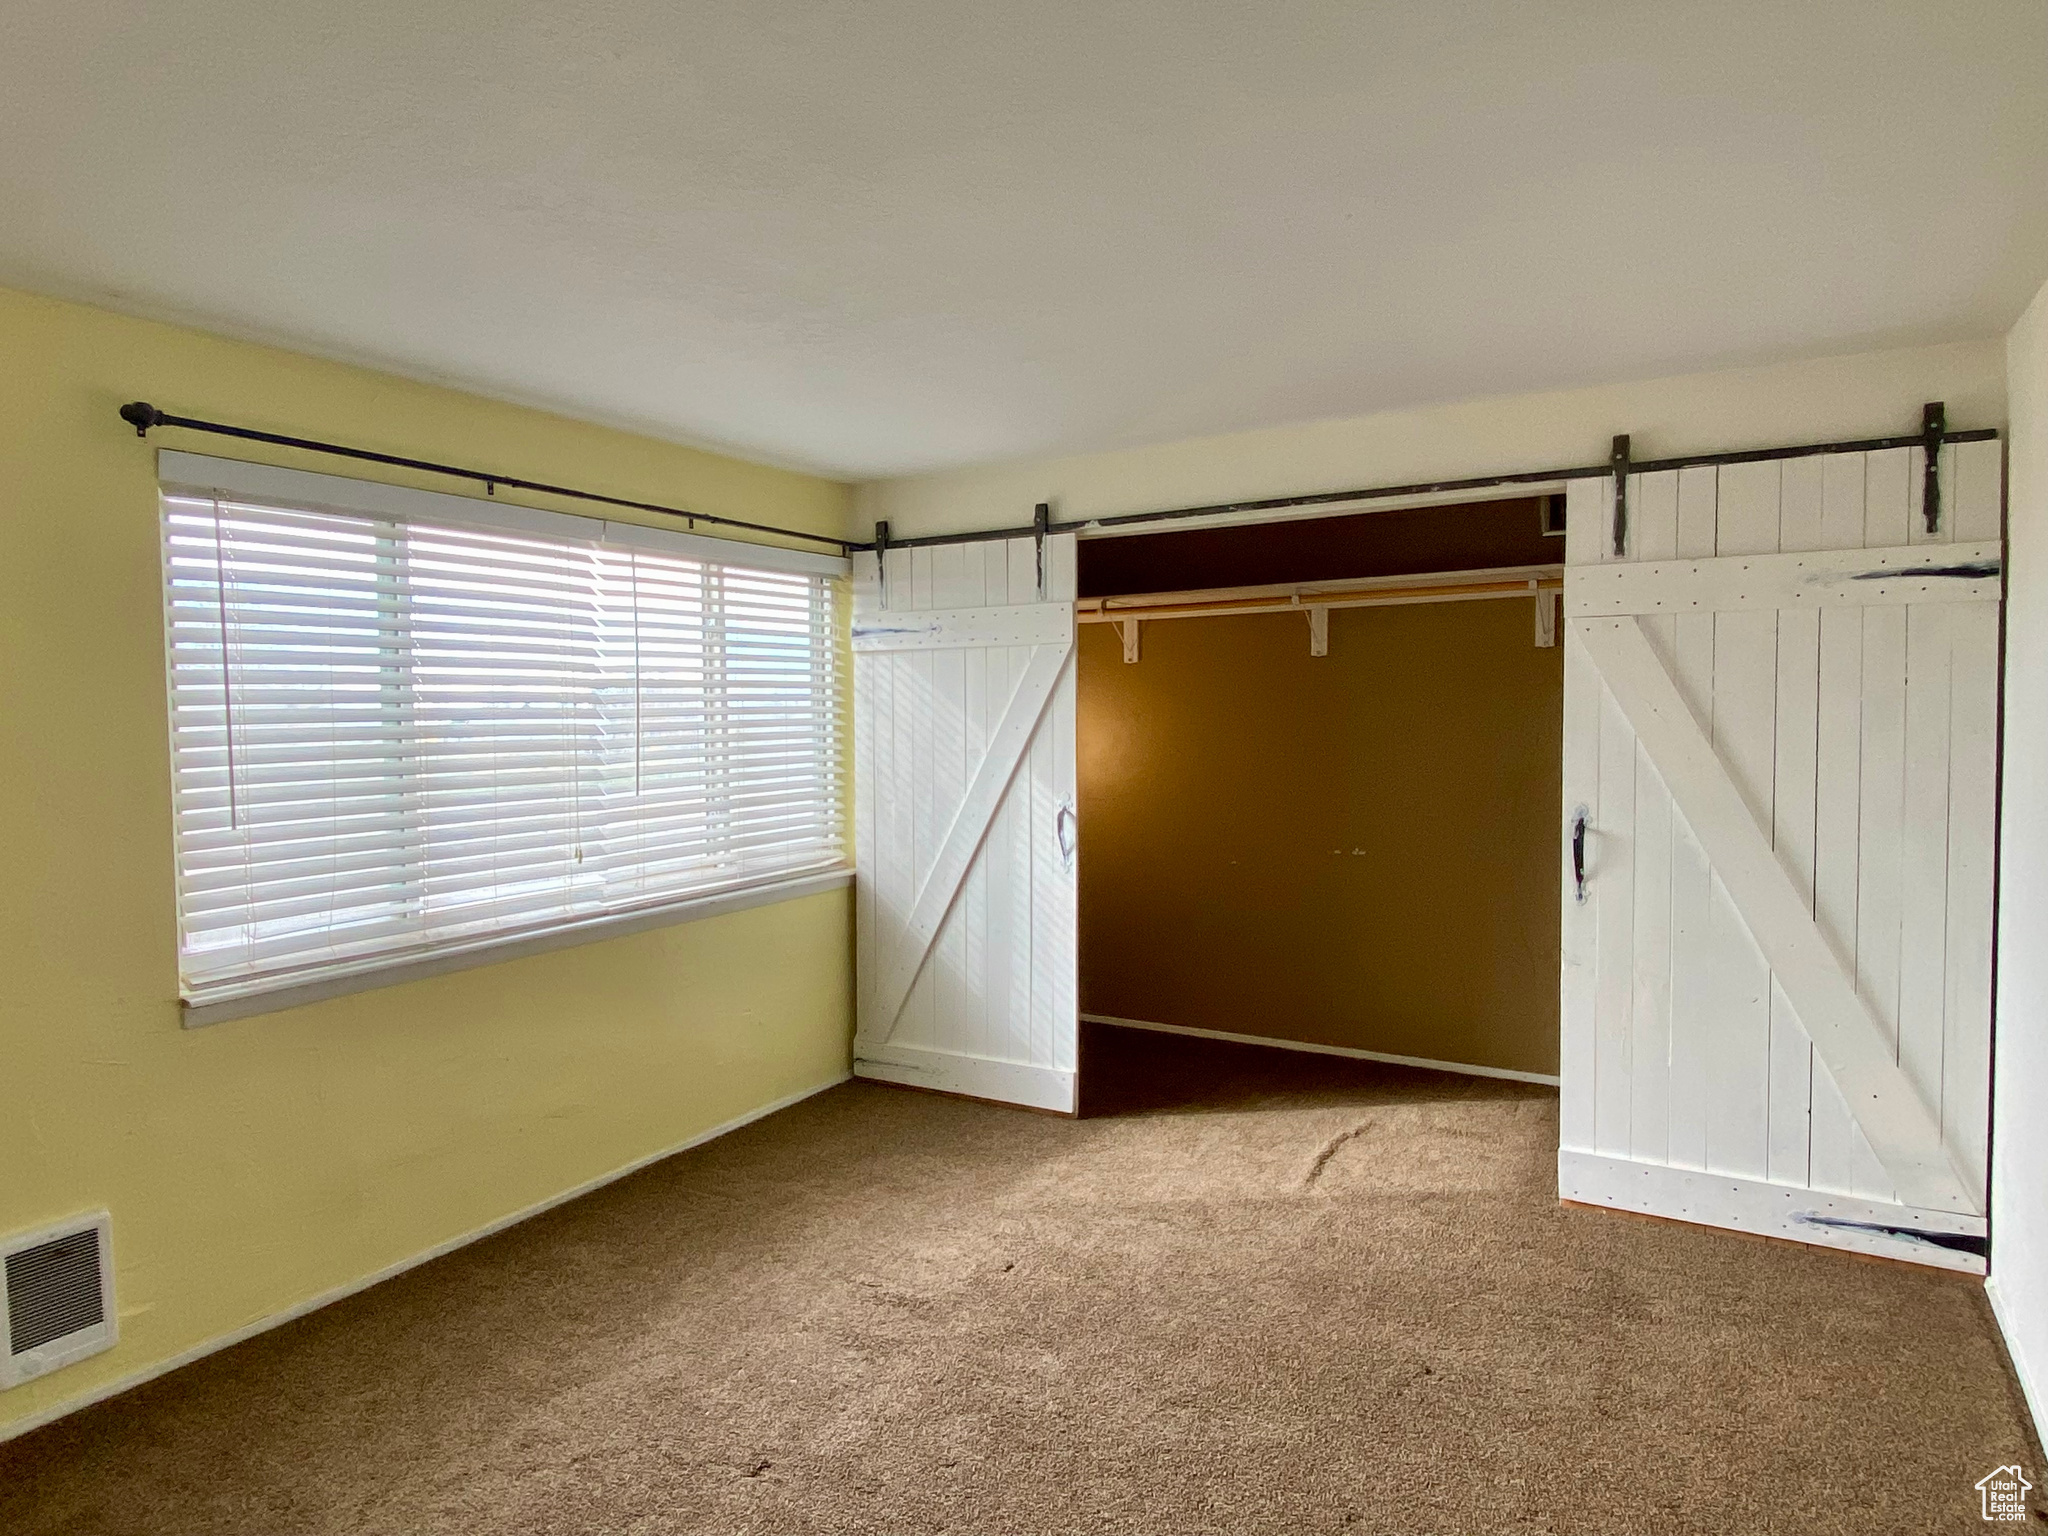 Unfurnished bedroom with a barn door and light colored carpet